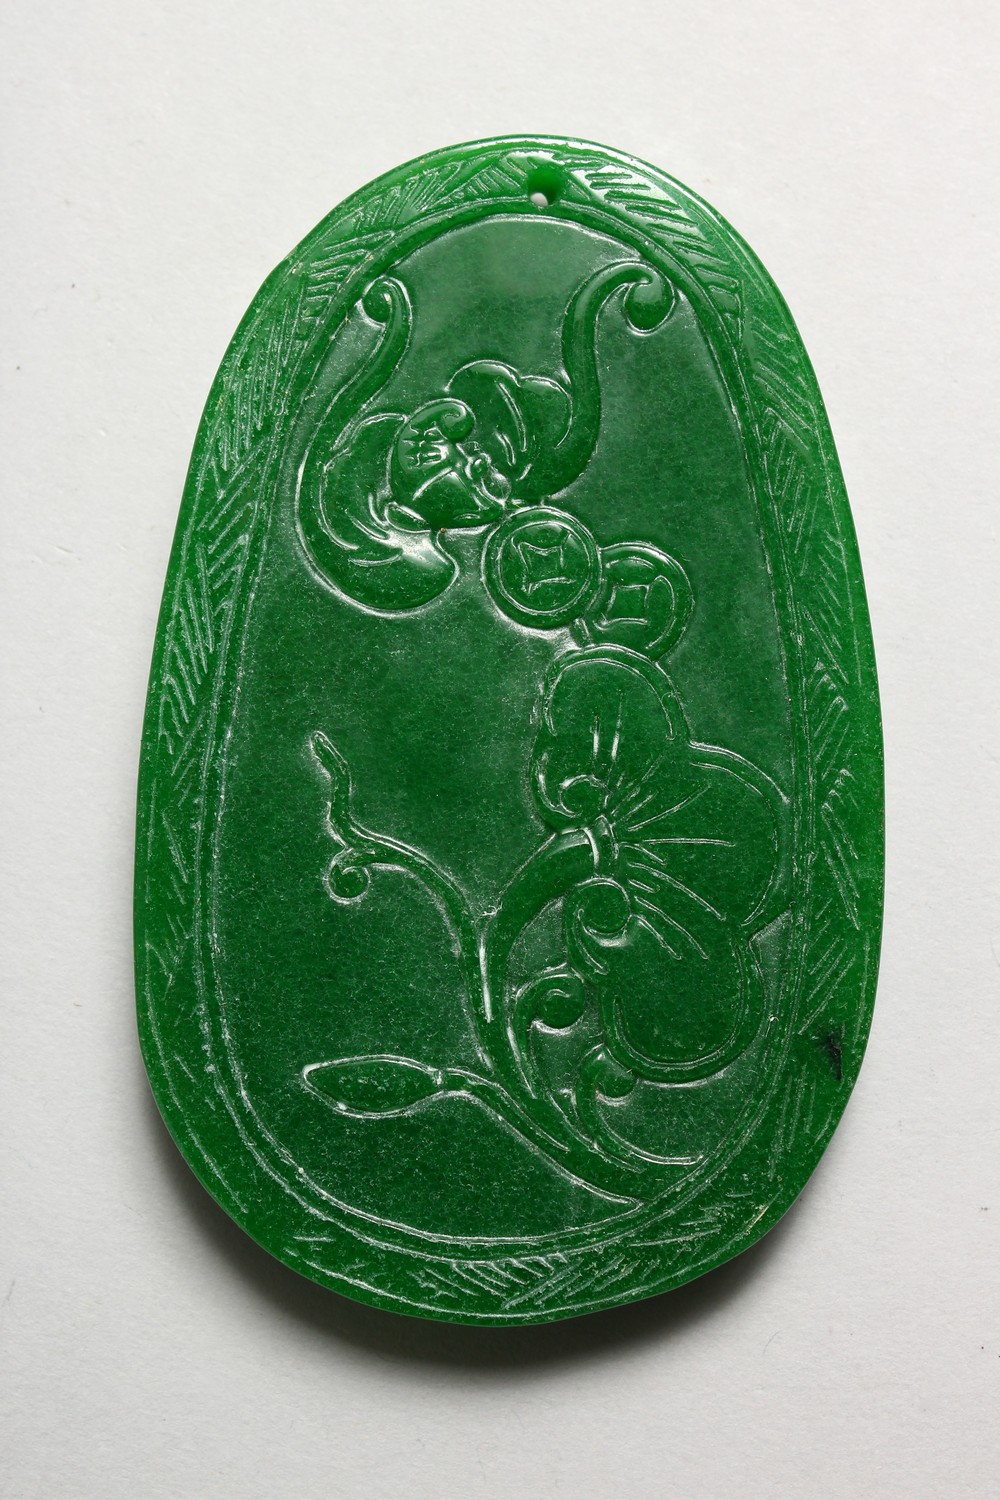 A LARGE CARVED APPLE GREEN JADE PENDANT. 3.75ins high. - Image 2 of 2